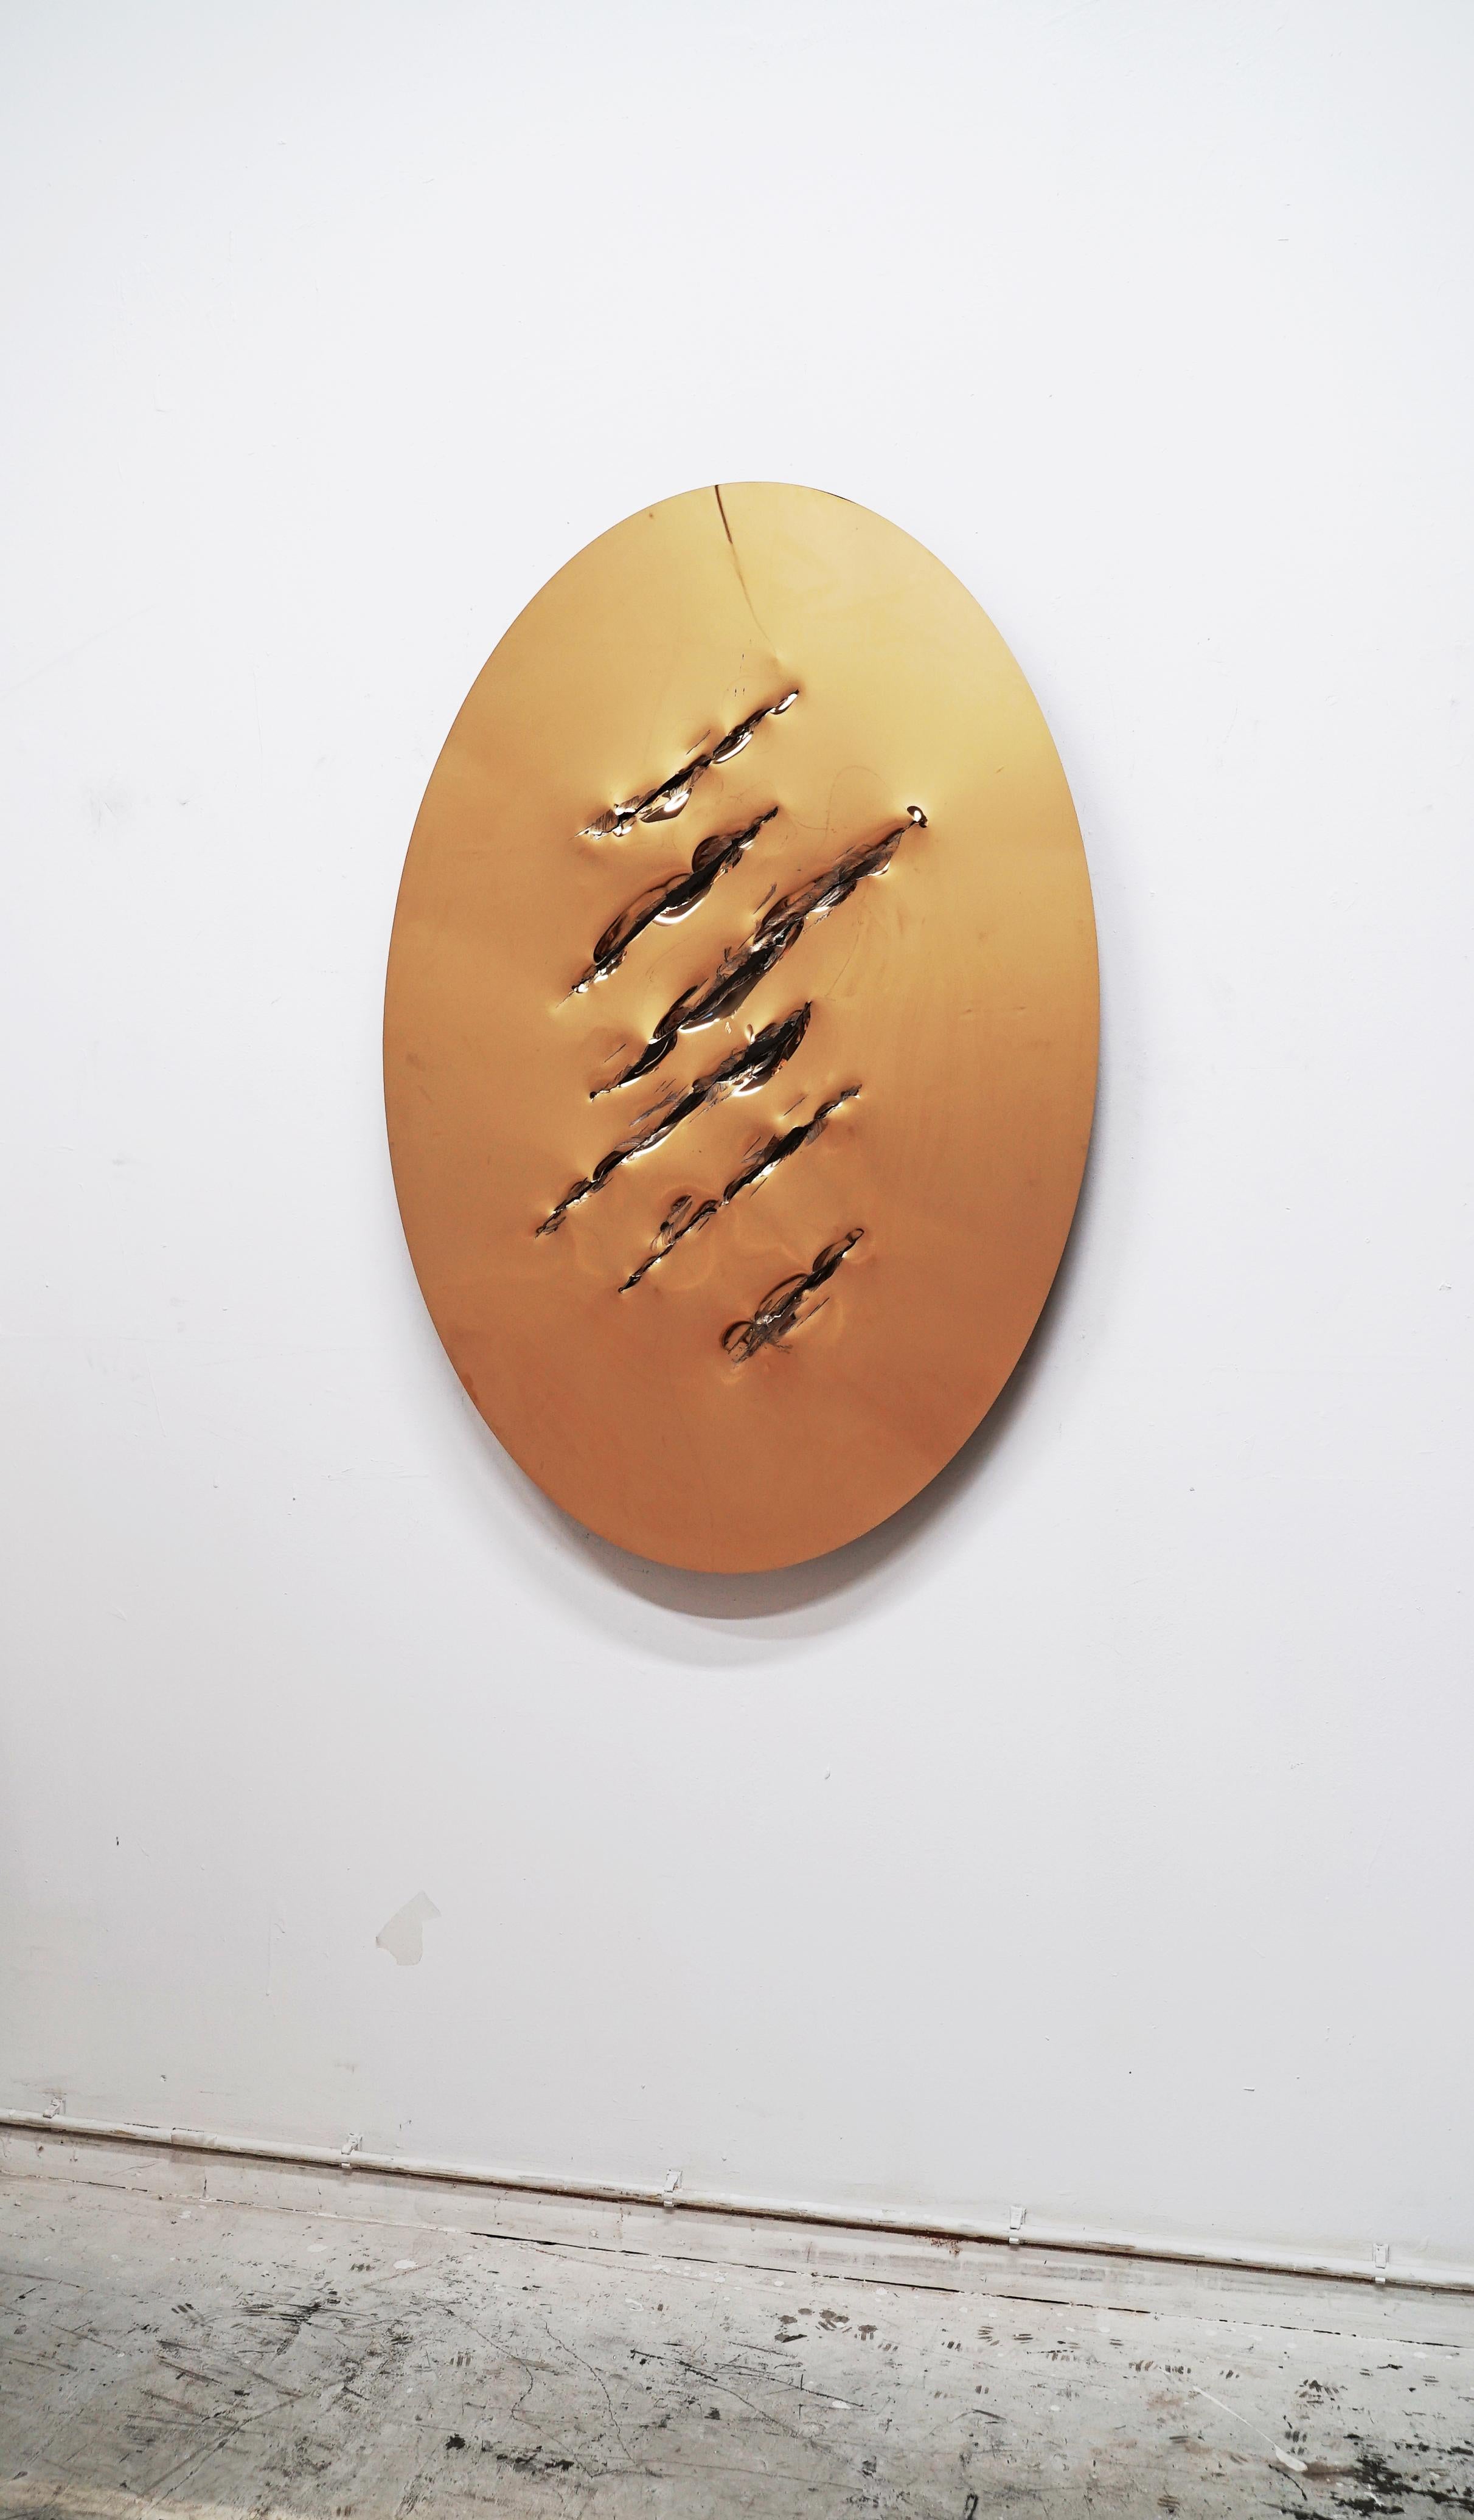 Shiny oval steel artwork with golden mirrored surface with ax cuts 120 x 60 cm - Contemporary Sculpture by John Franzen